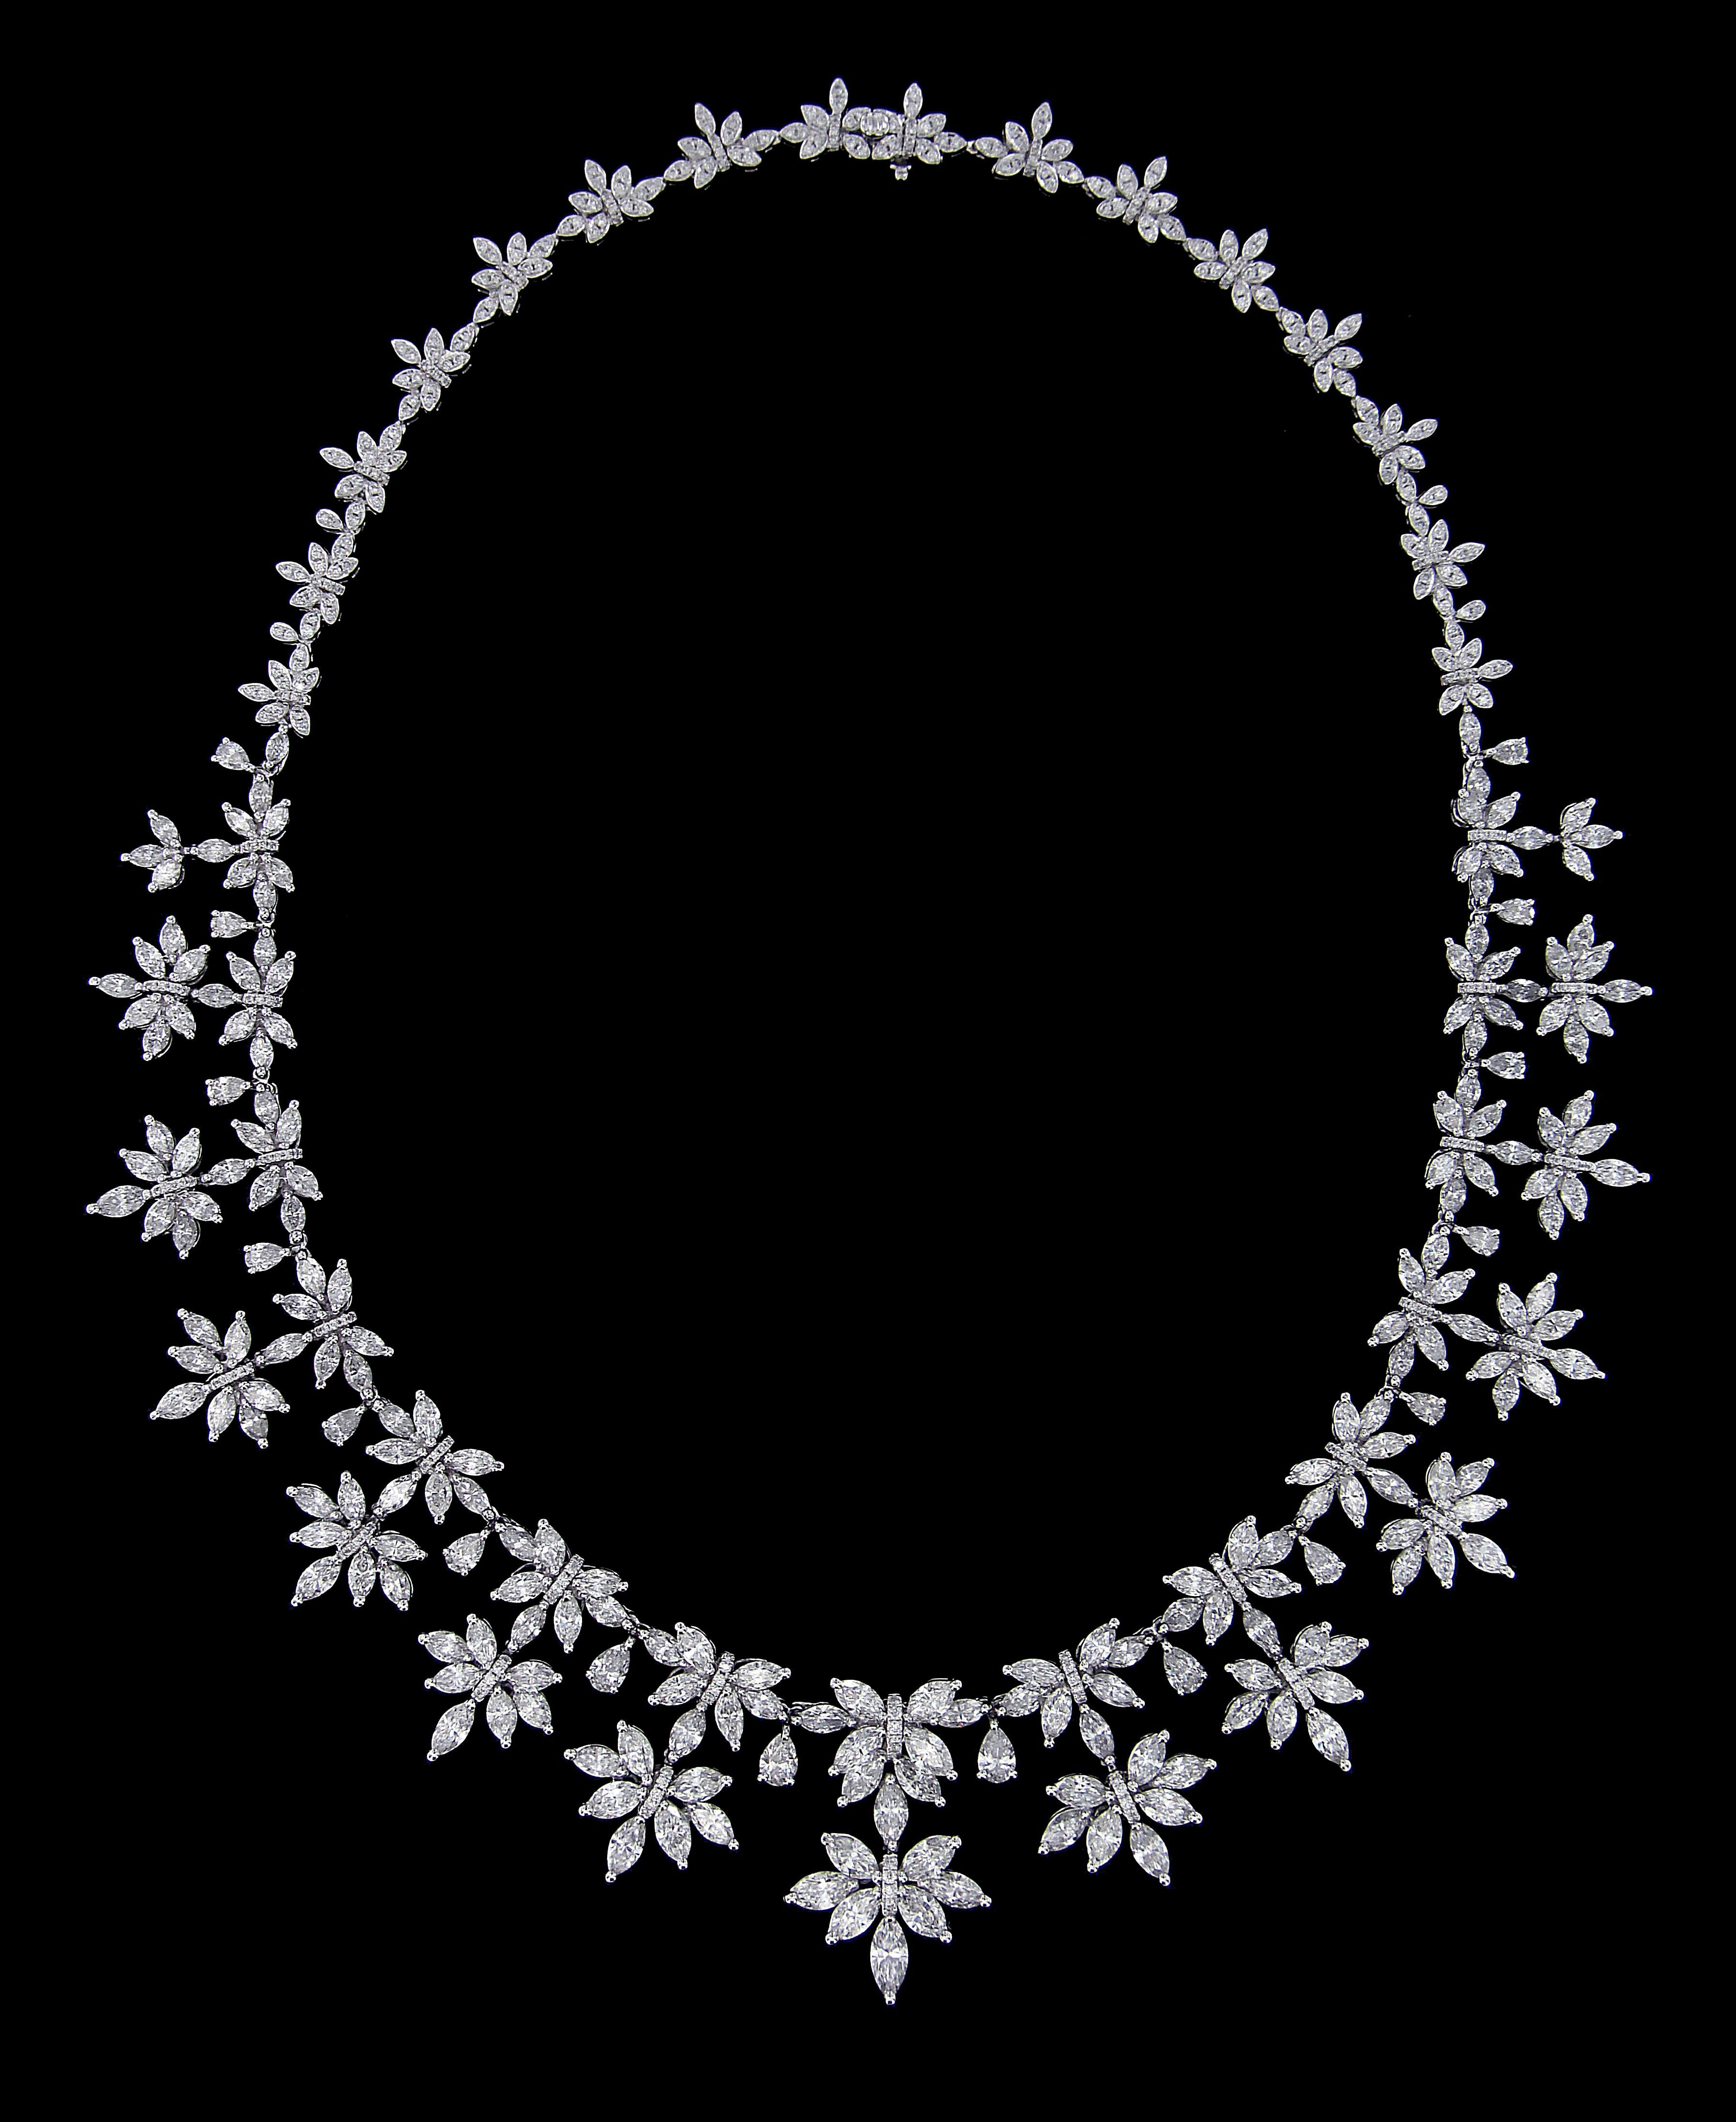 Lucullan 18 Karat white Gold And Diamond Wedding Set.
Necklace:
Diamonds of approximately 27.315 carats, mounted on 18 karat white gold necklace. The Necklace weighs approximately around 52.507 grams.


Please note: The charges specified do not